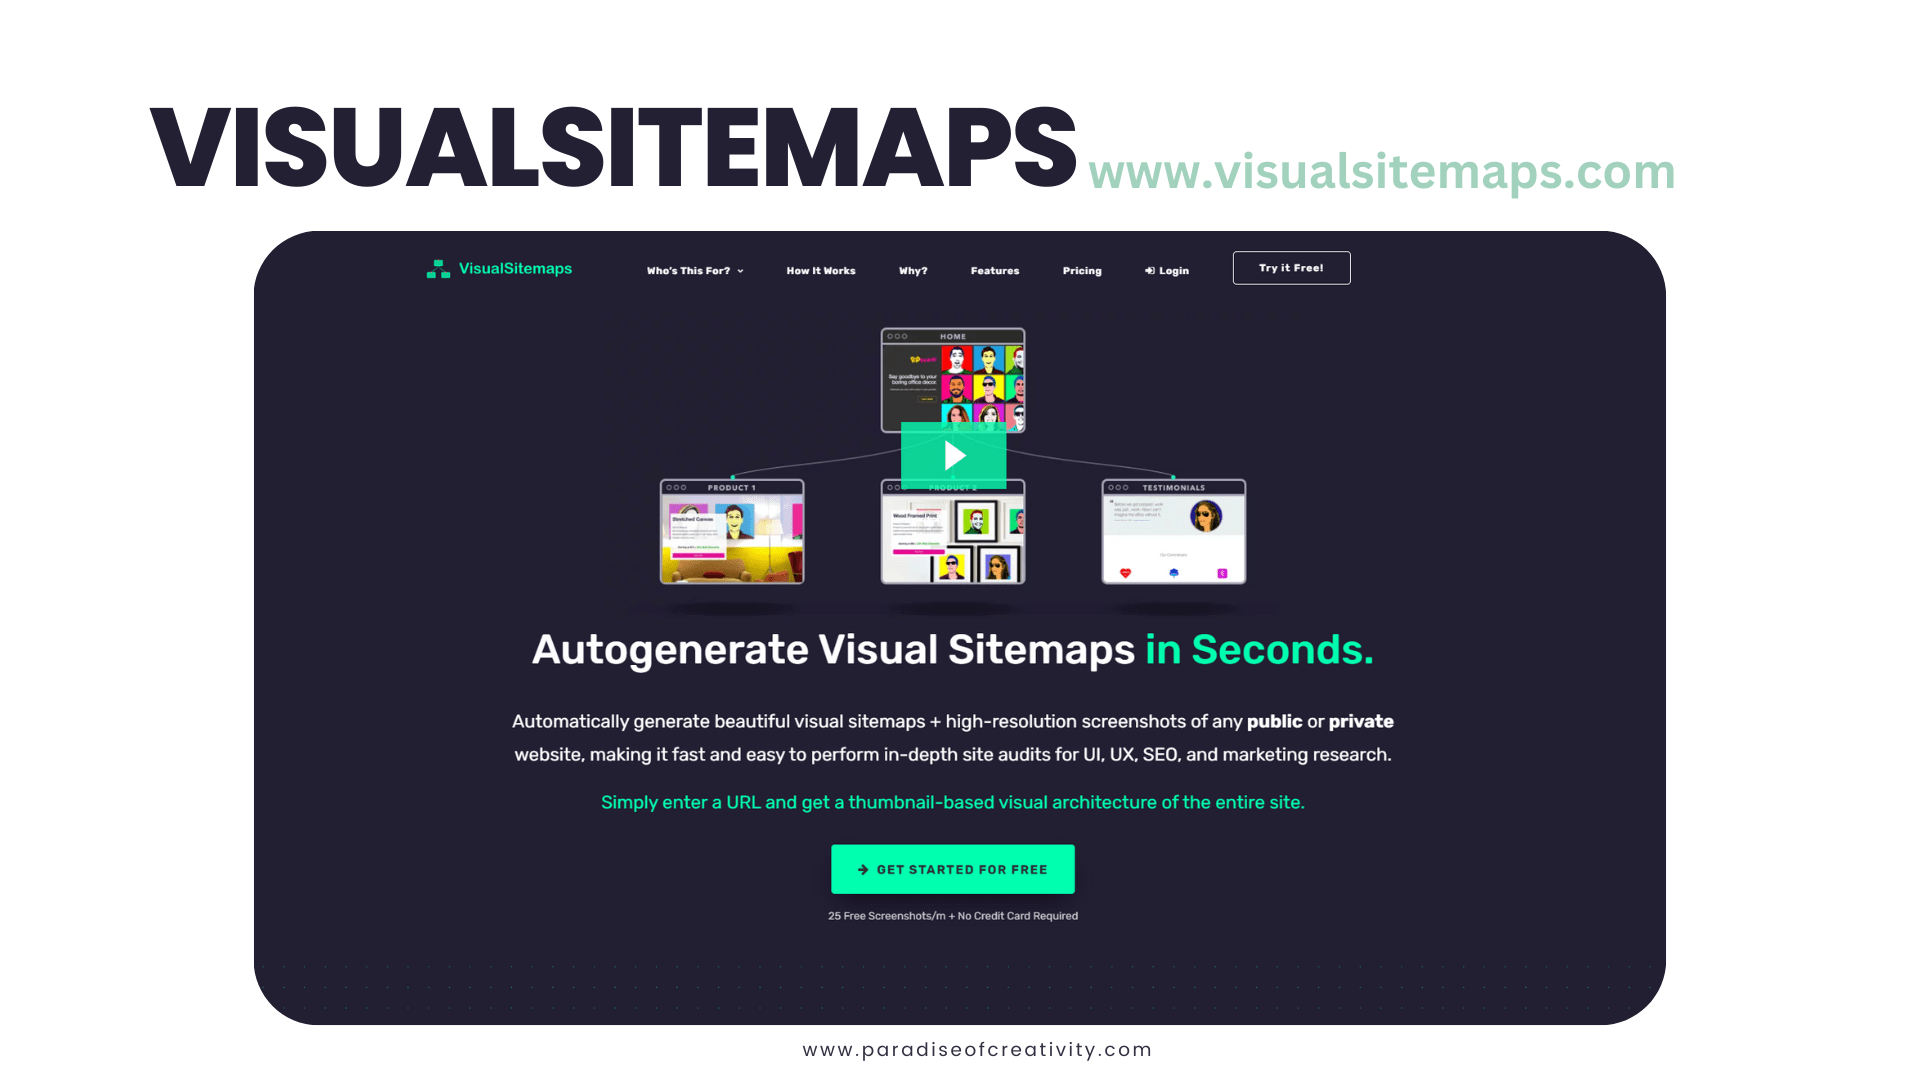 VisualSitemaps automatically generates high-quality visual sitemaps + high-res screenshots of any PUBLIC or PRIVATE website, making it fast and easy to perform in-depth site audits for SEO, UX and marketing research.